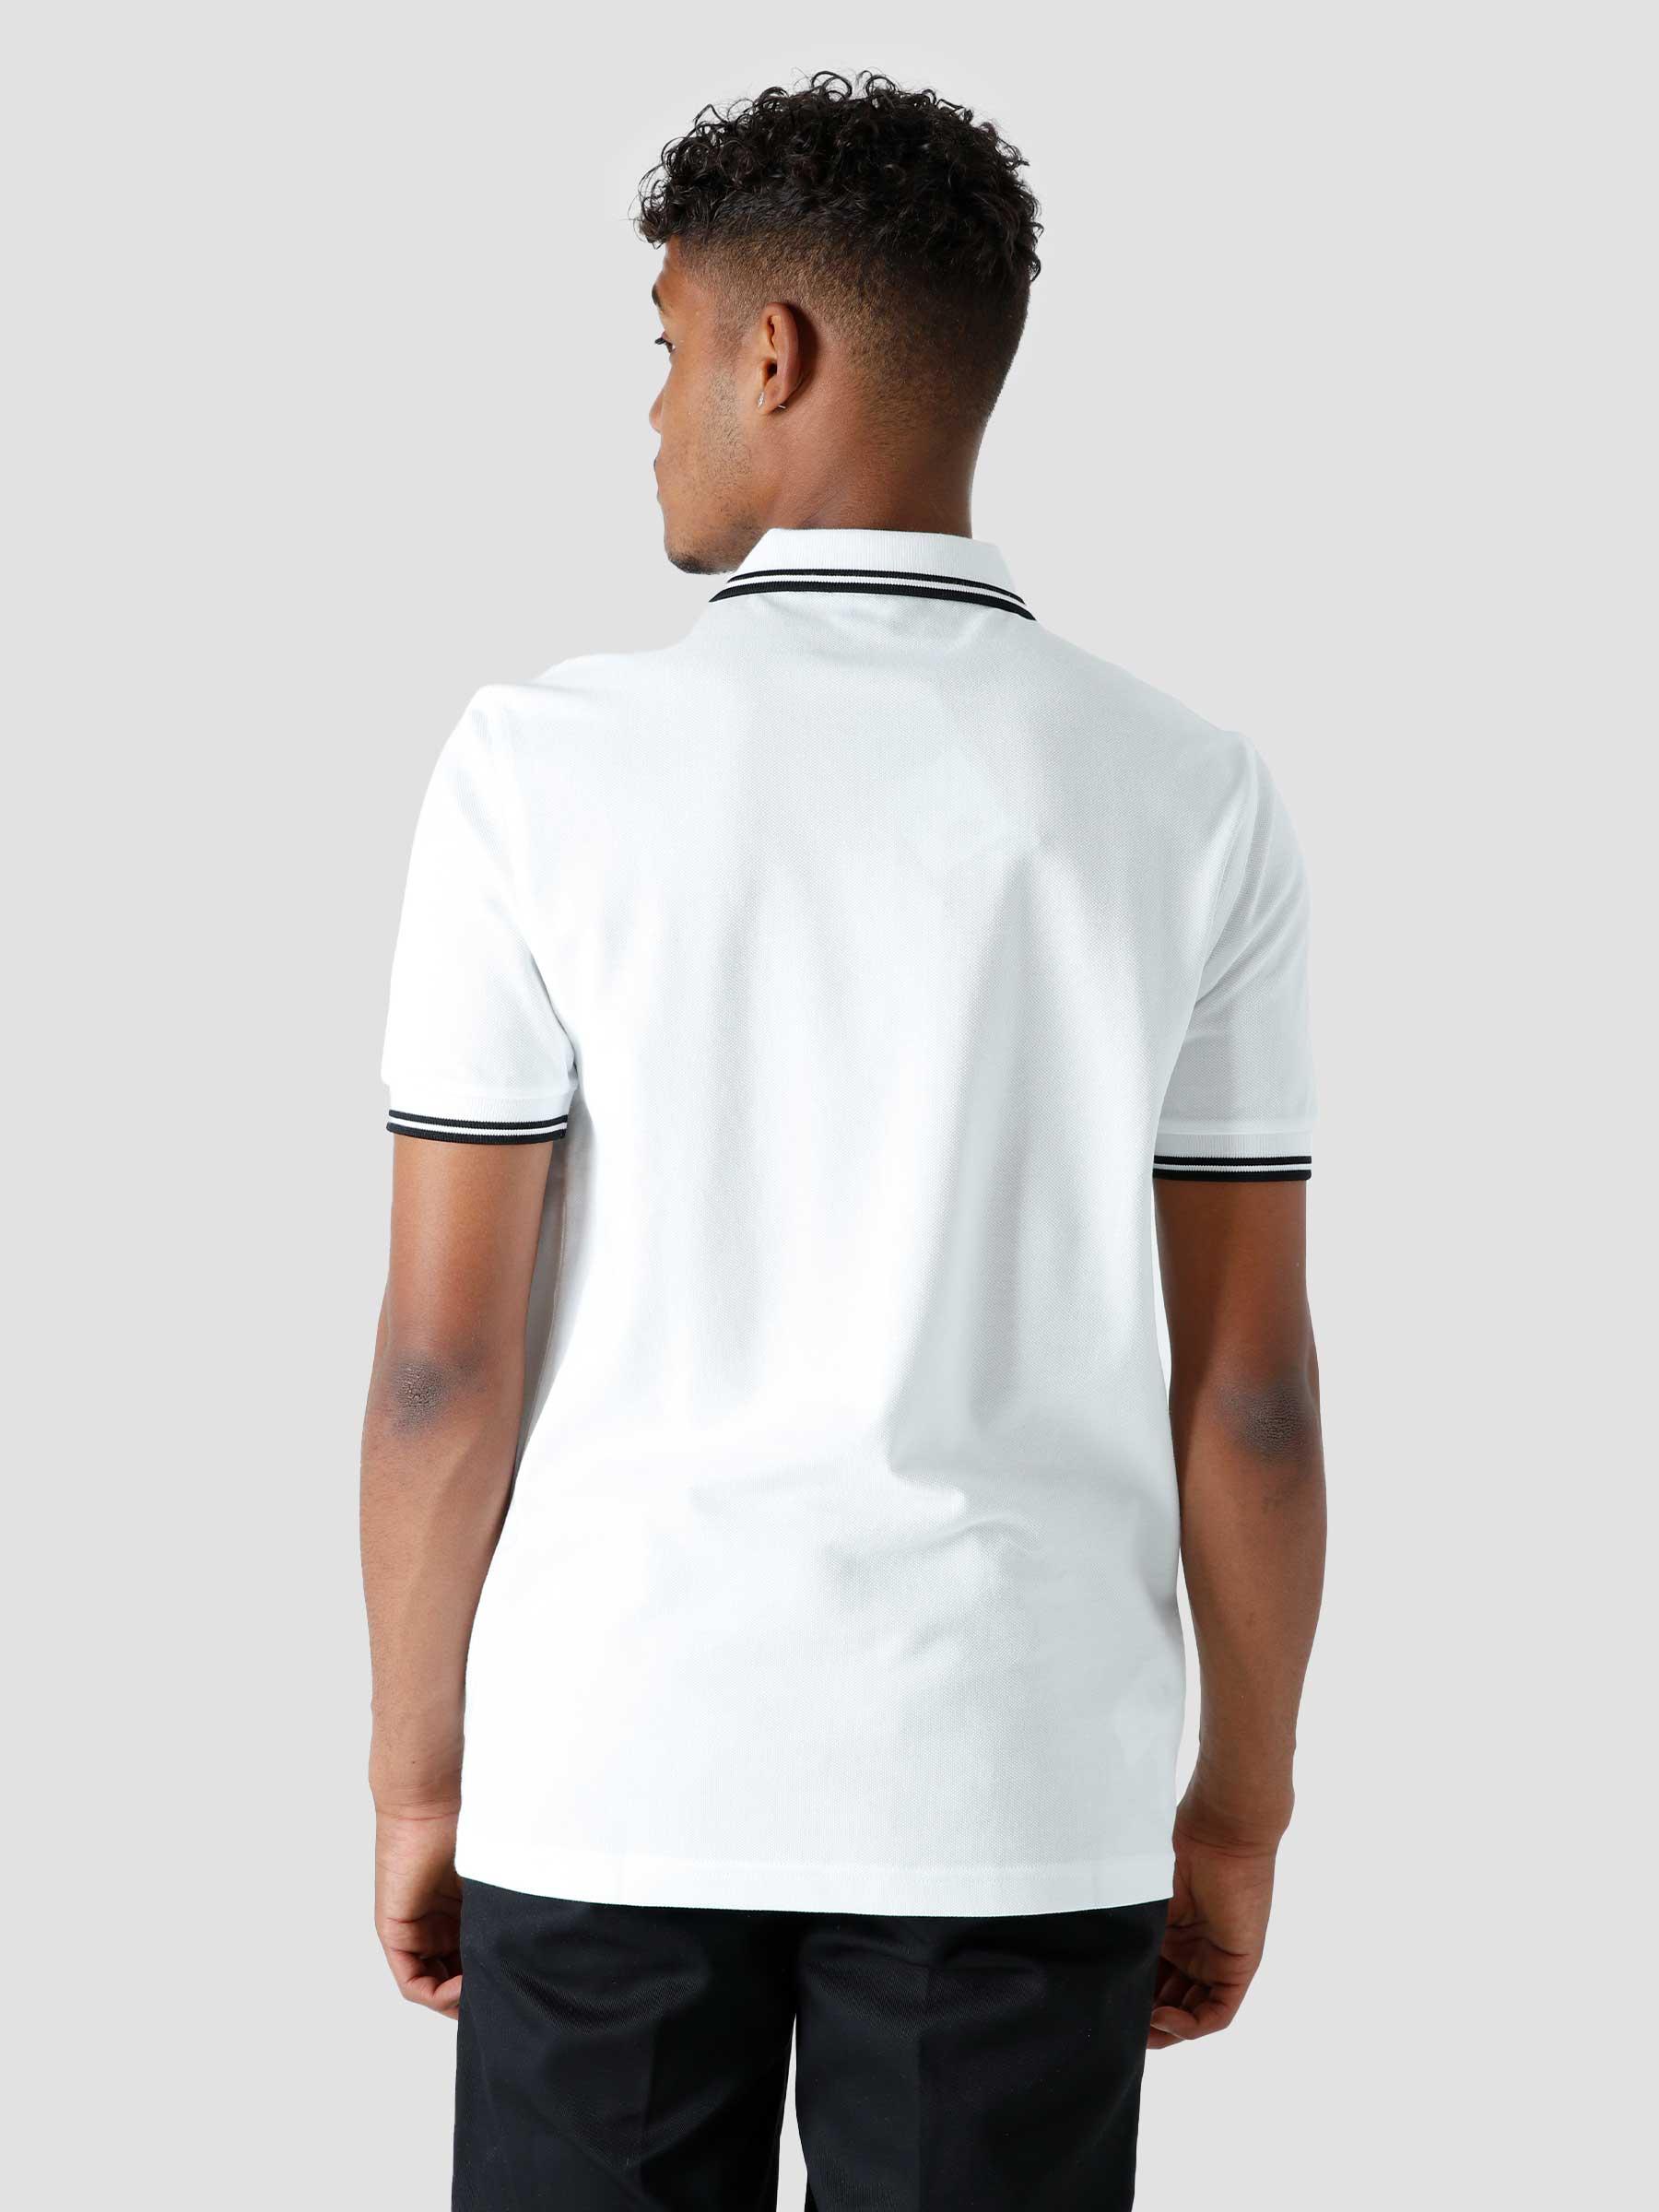 Twin Tipped Fred Perry Shirt White M3600-200